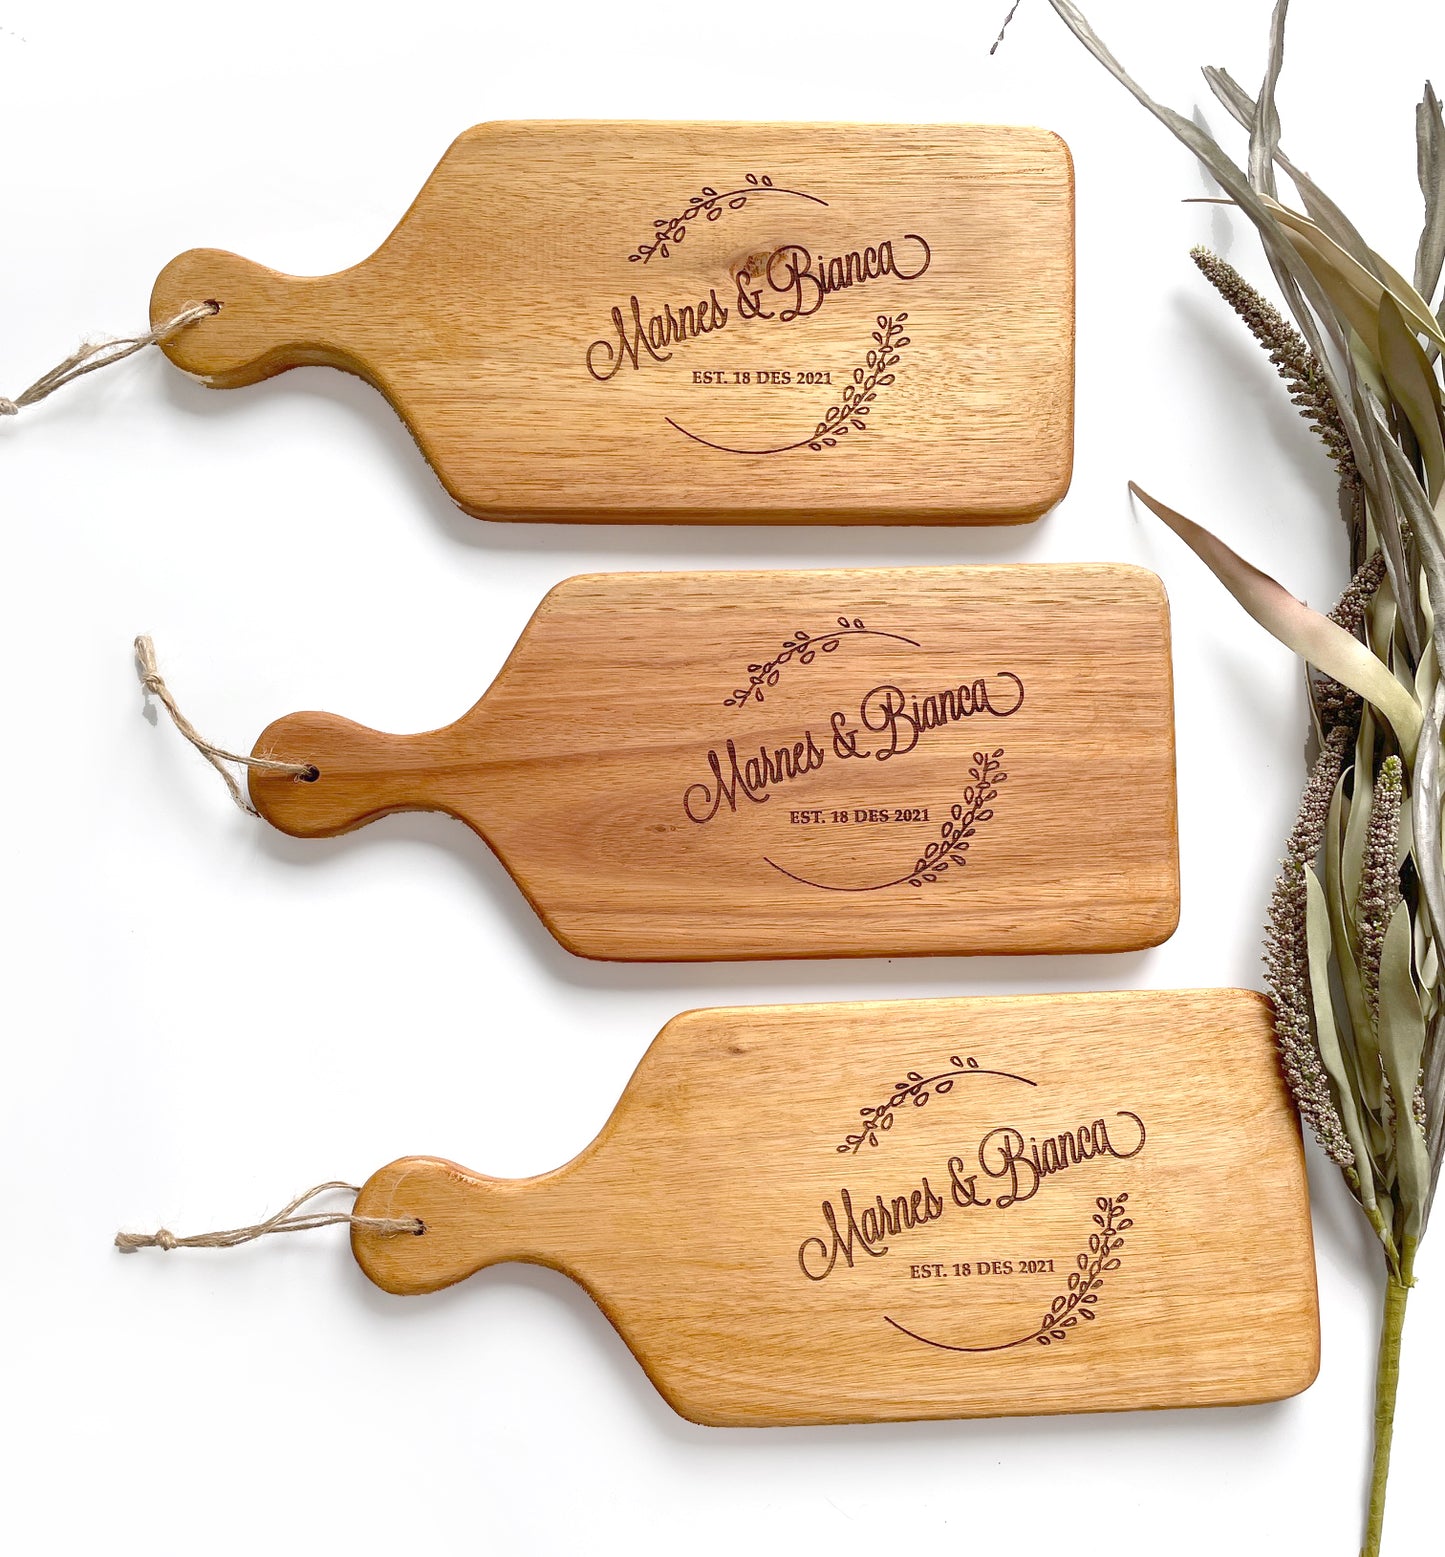 Personalized engraved wreath cheese paddle - 56cm long